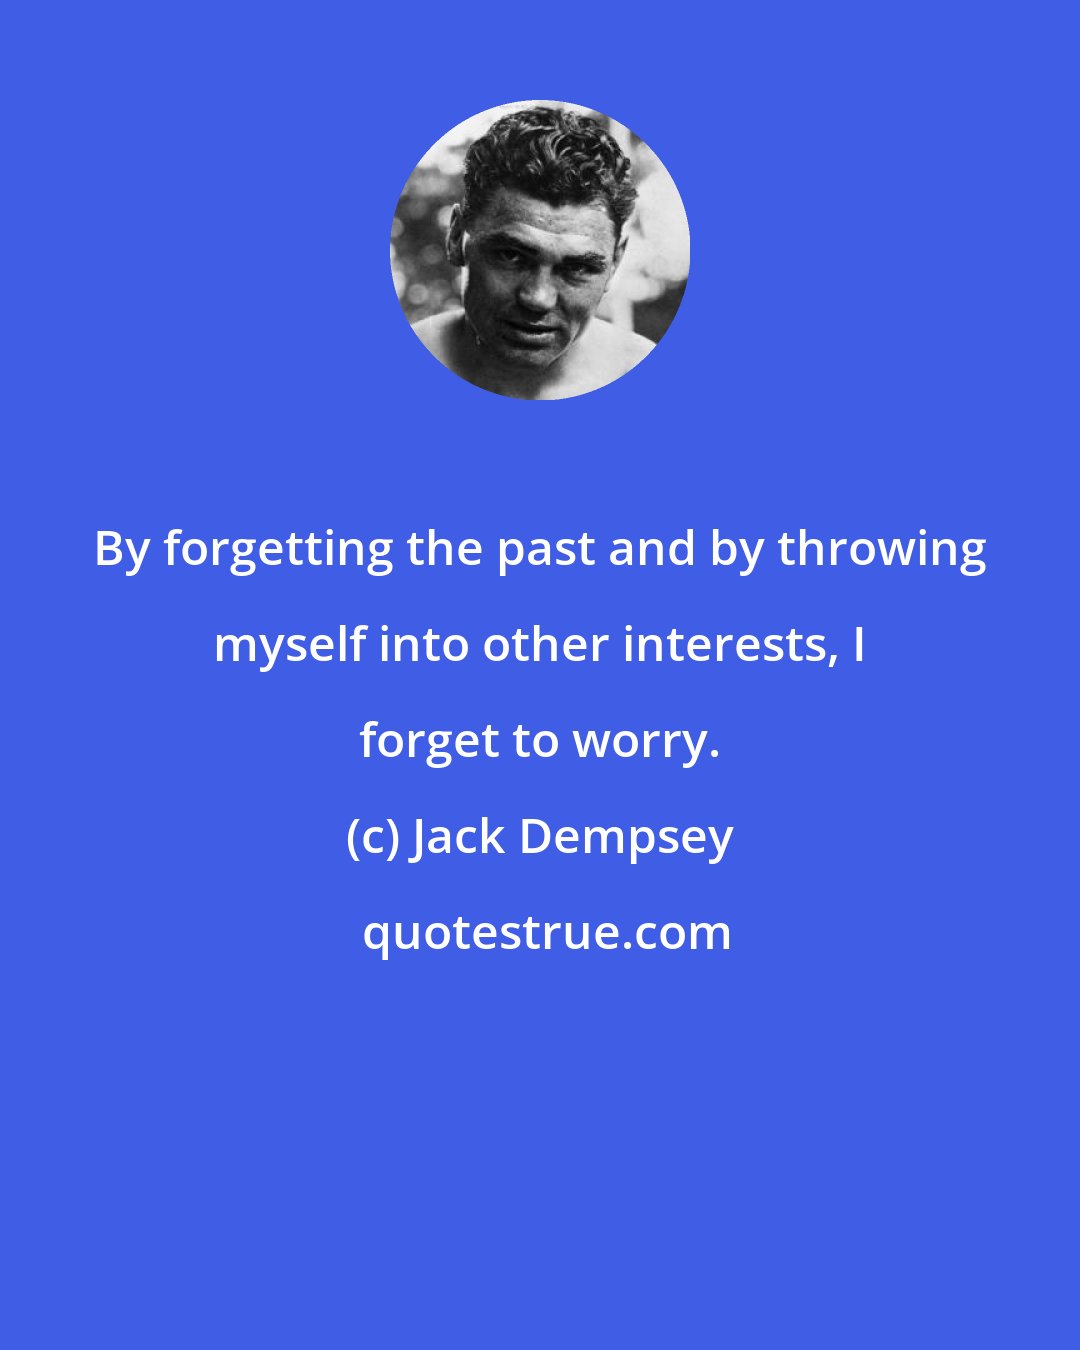 Jack Dempsey: By forgetting the past and by throwing myself into other interests, I forget to worry.